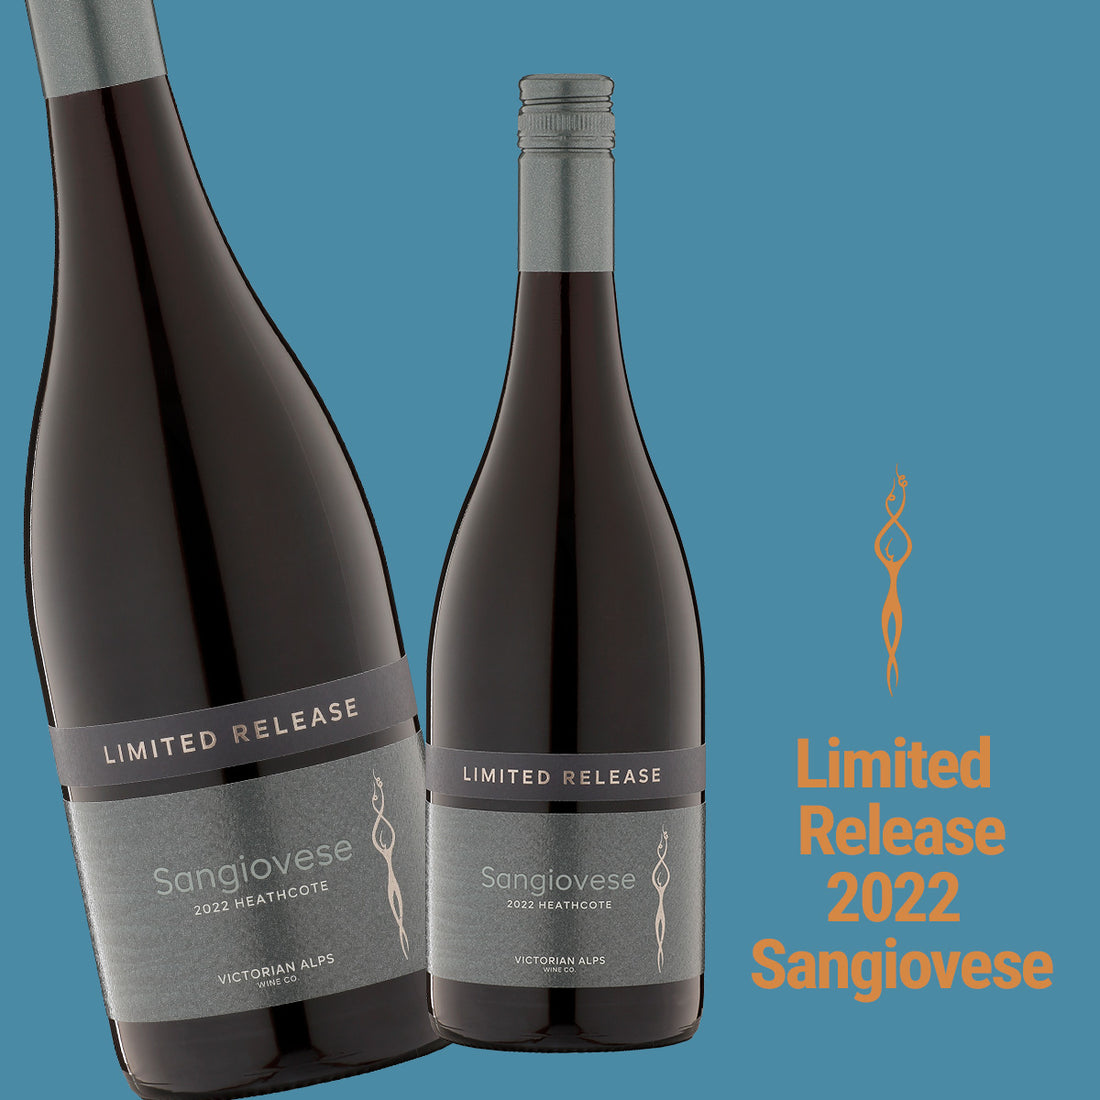 New Release - Limited Release 2022 Sangiovese